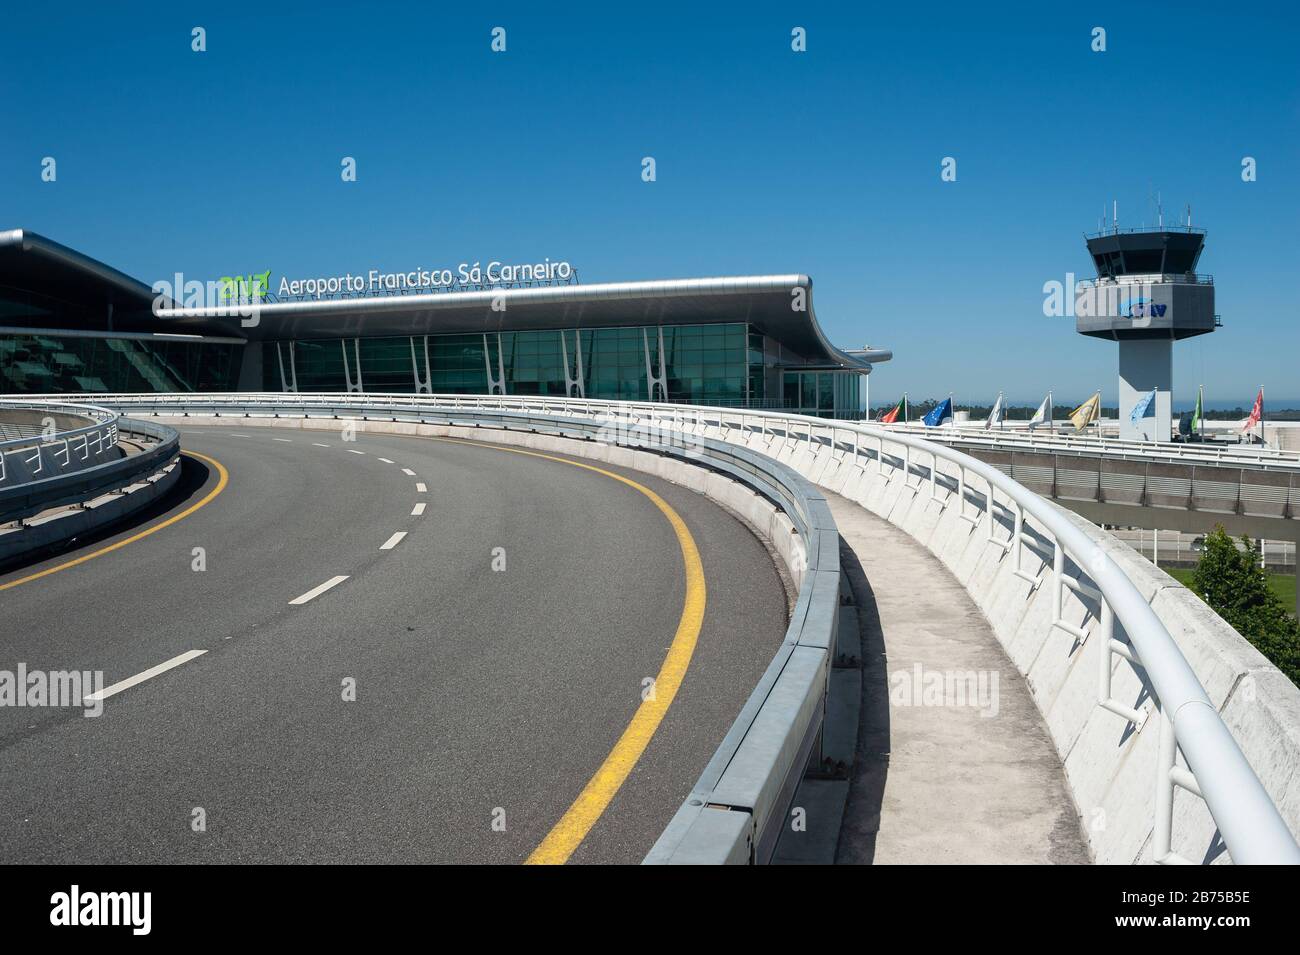 16.06.2018, Porto, Portugal, Europe - View of the access road, terminal and tower of Porto's international airport Francisco Sa Carneiro. [automated translation] Stock Photo